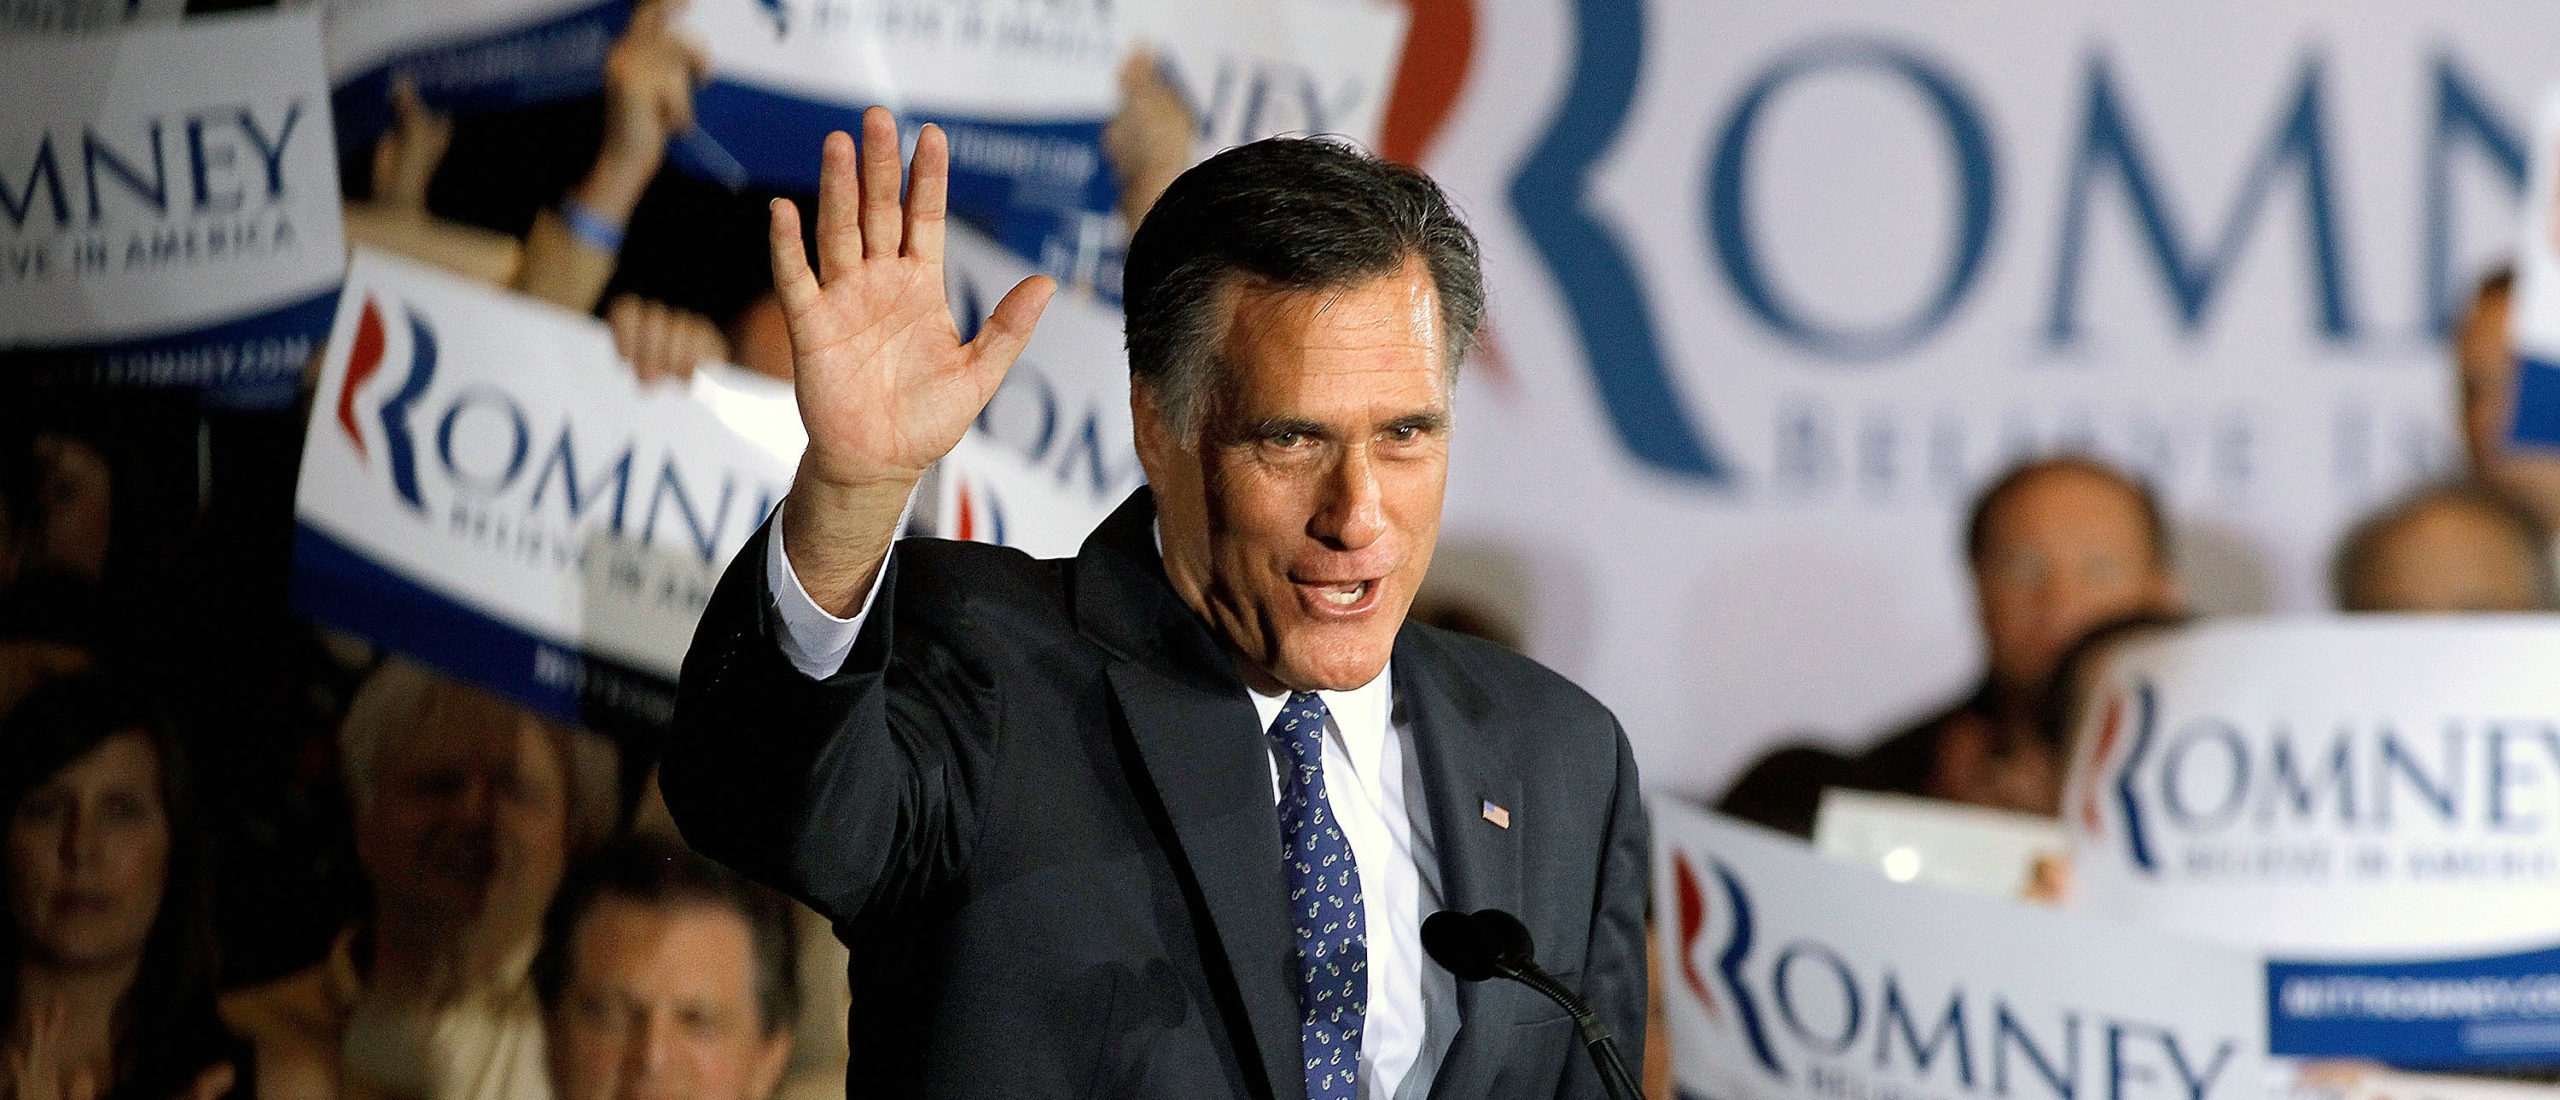 Mitt Romney Has An 84% Approval Rating With Utah Democrats | The Daily Caller